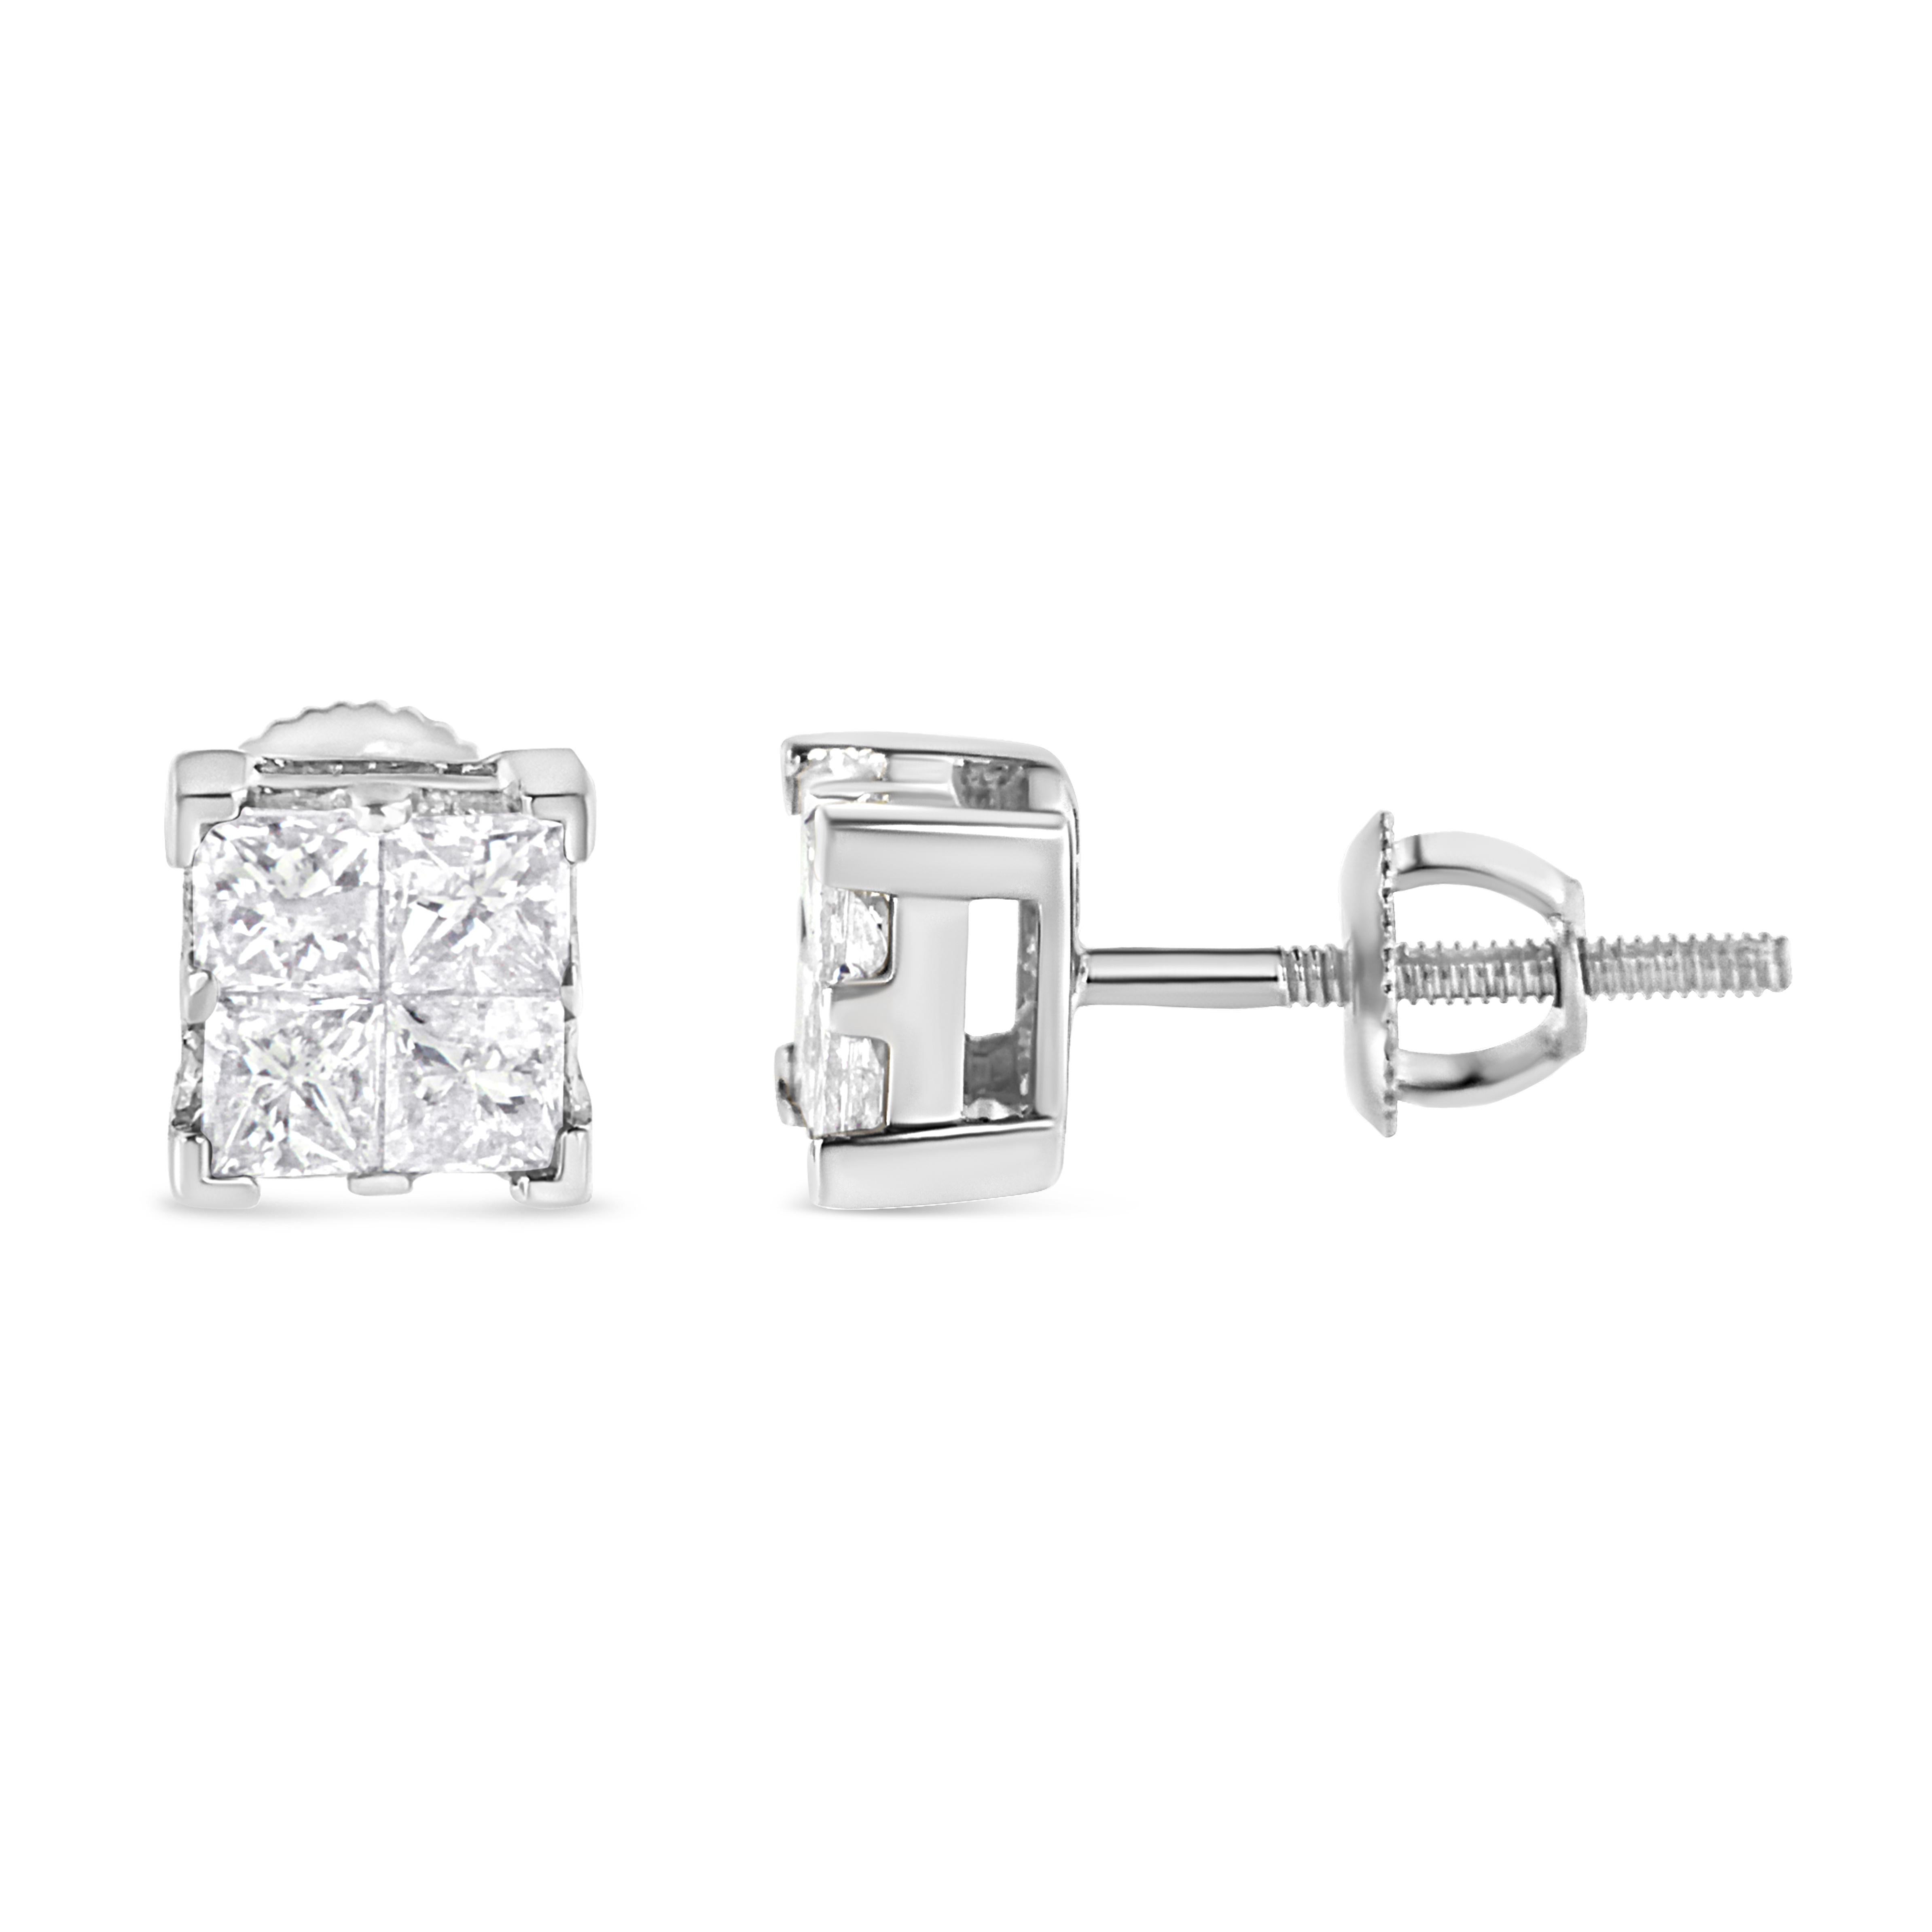 Set the stage for love with these sparkling diamond stud earrings. Crafted in warm 10K white gold, each earring features a squared composite of 4 sparkling princess-cut diamonds. Radiant with 3/4 ct. t.w. of diamonds and a brilliant buffed luster,